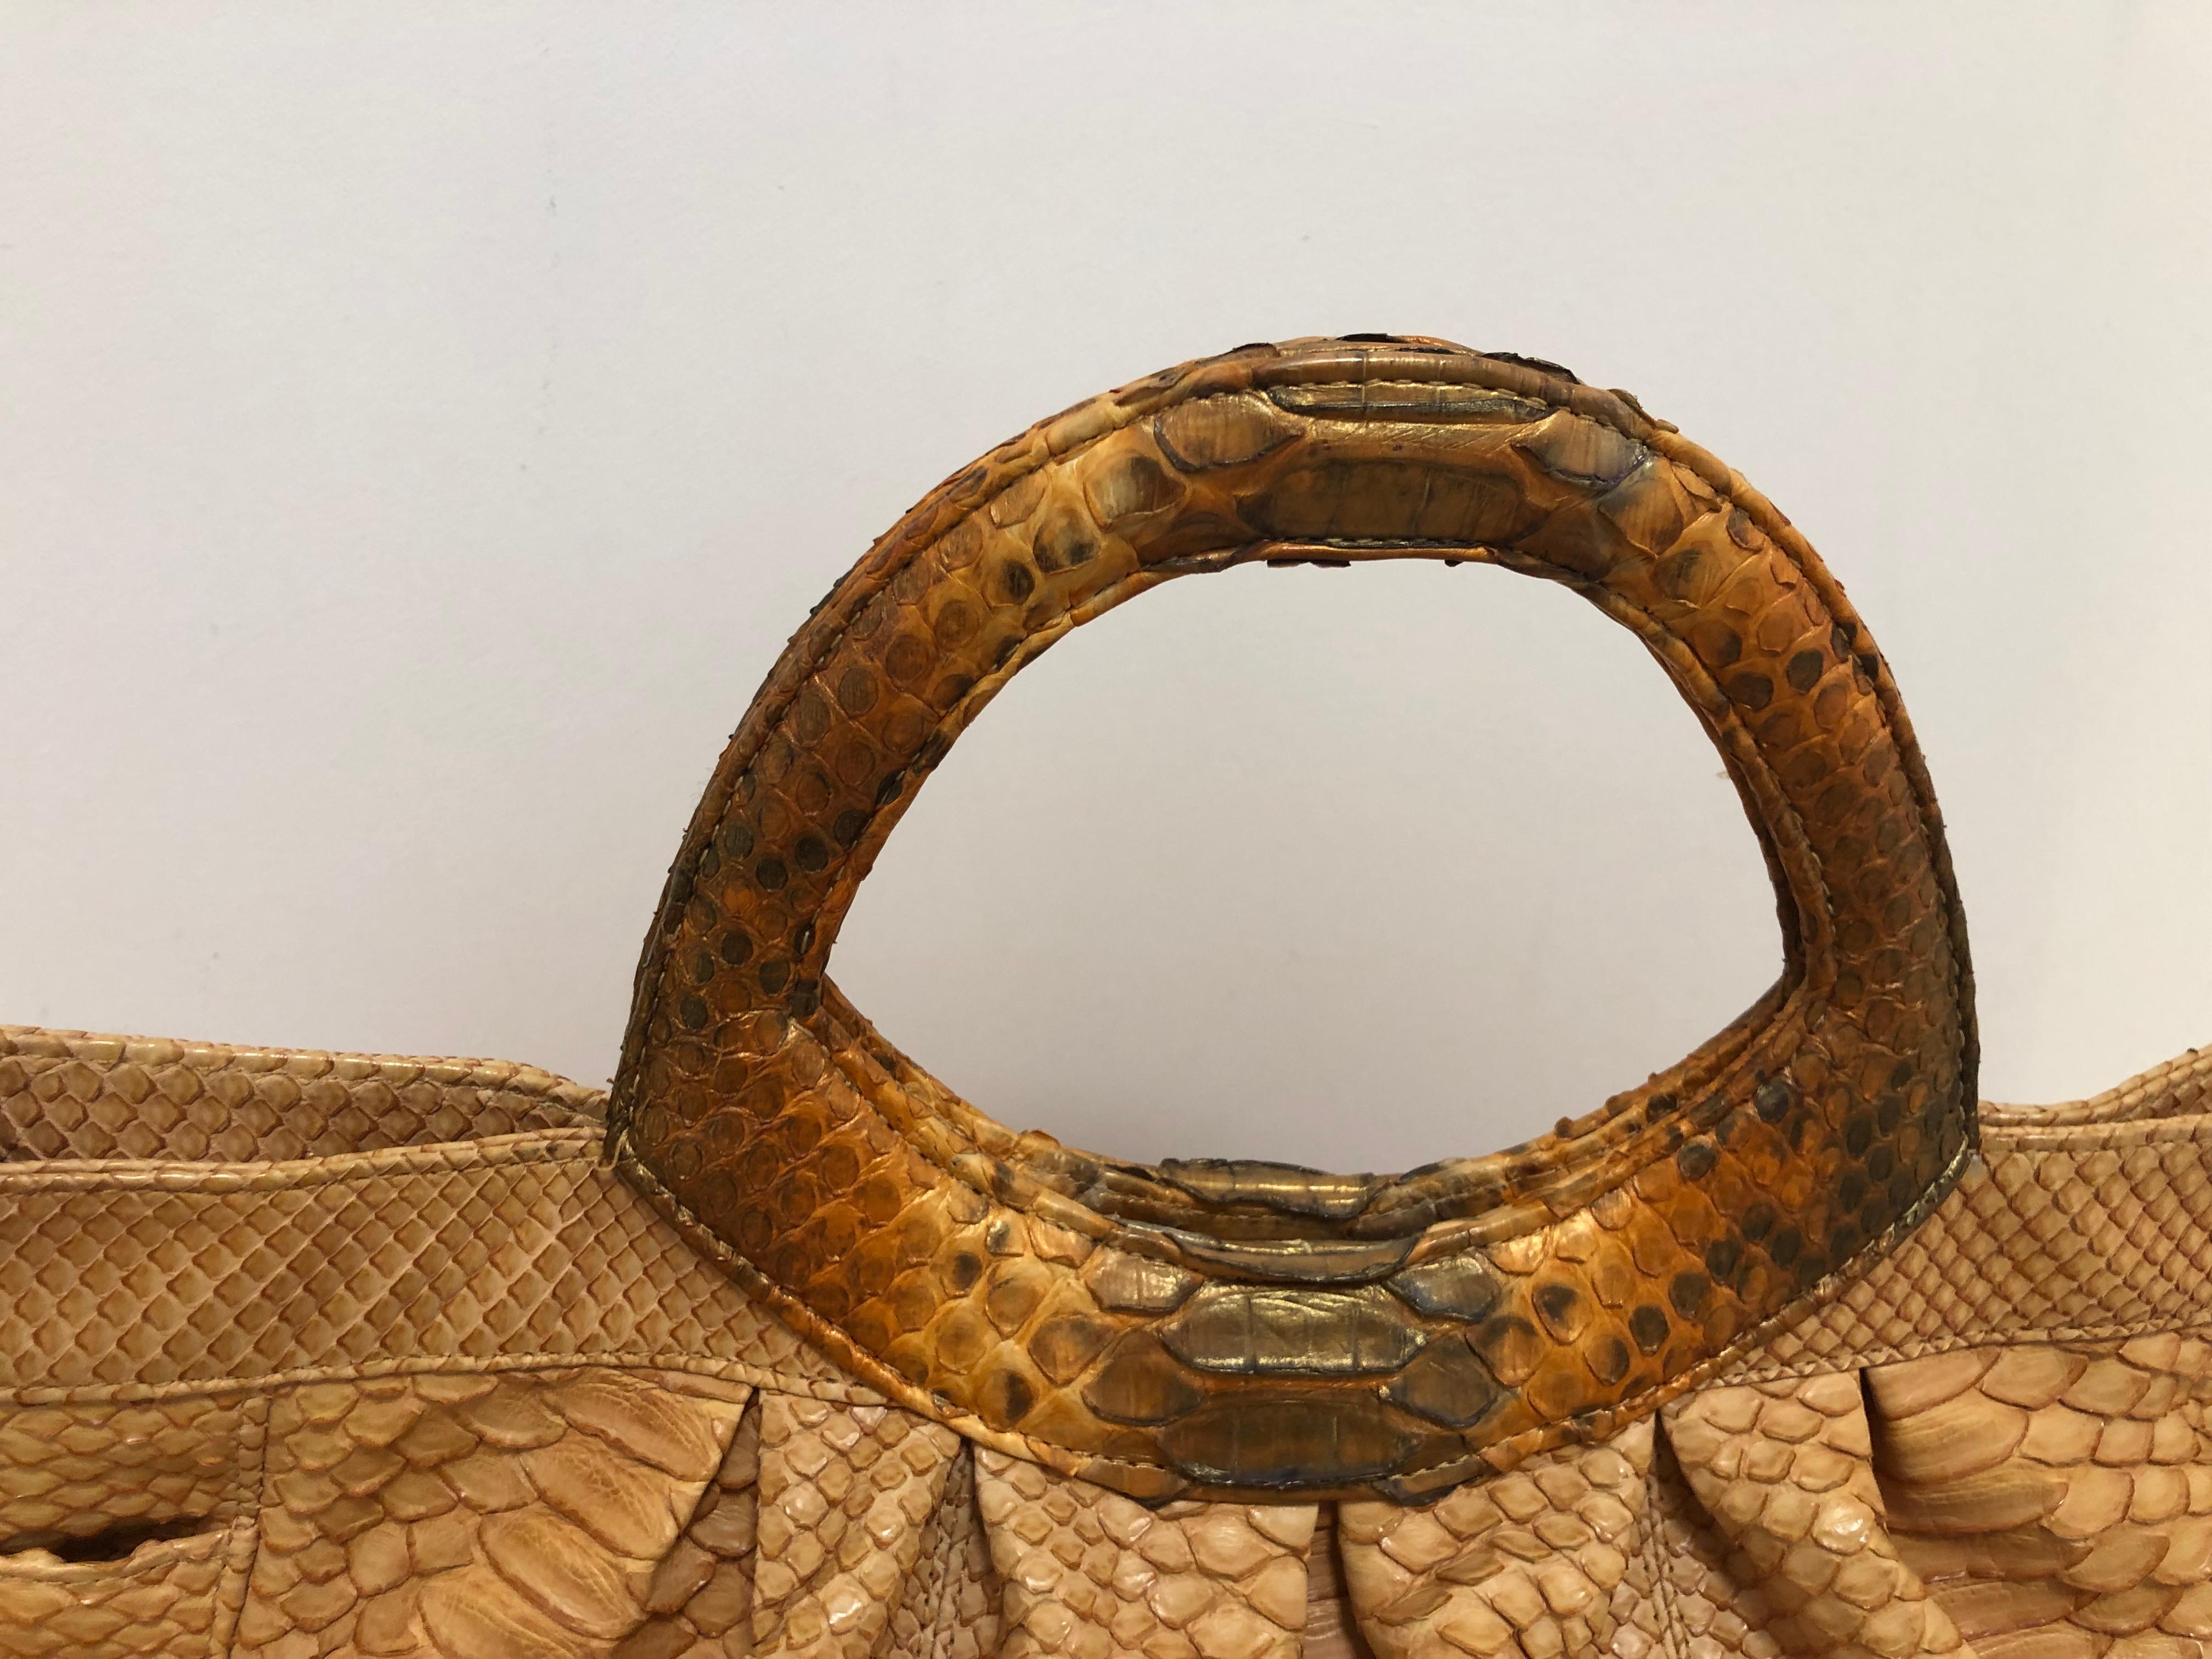 In fantastic condition, this very elegant pumpkin colored python handbag is manufactured in the USA to the highest standards. The exterior has two small but fairly deep side pockets, and the interior is in very good condition with lined with woven